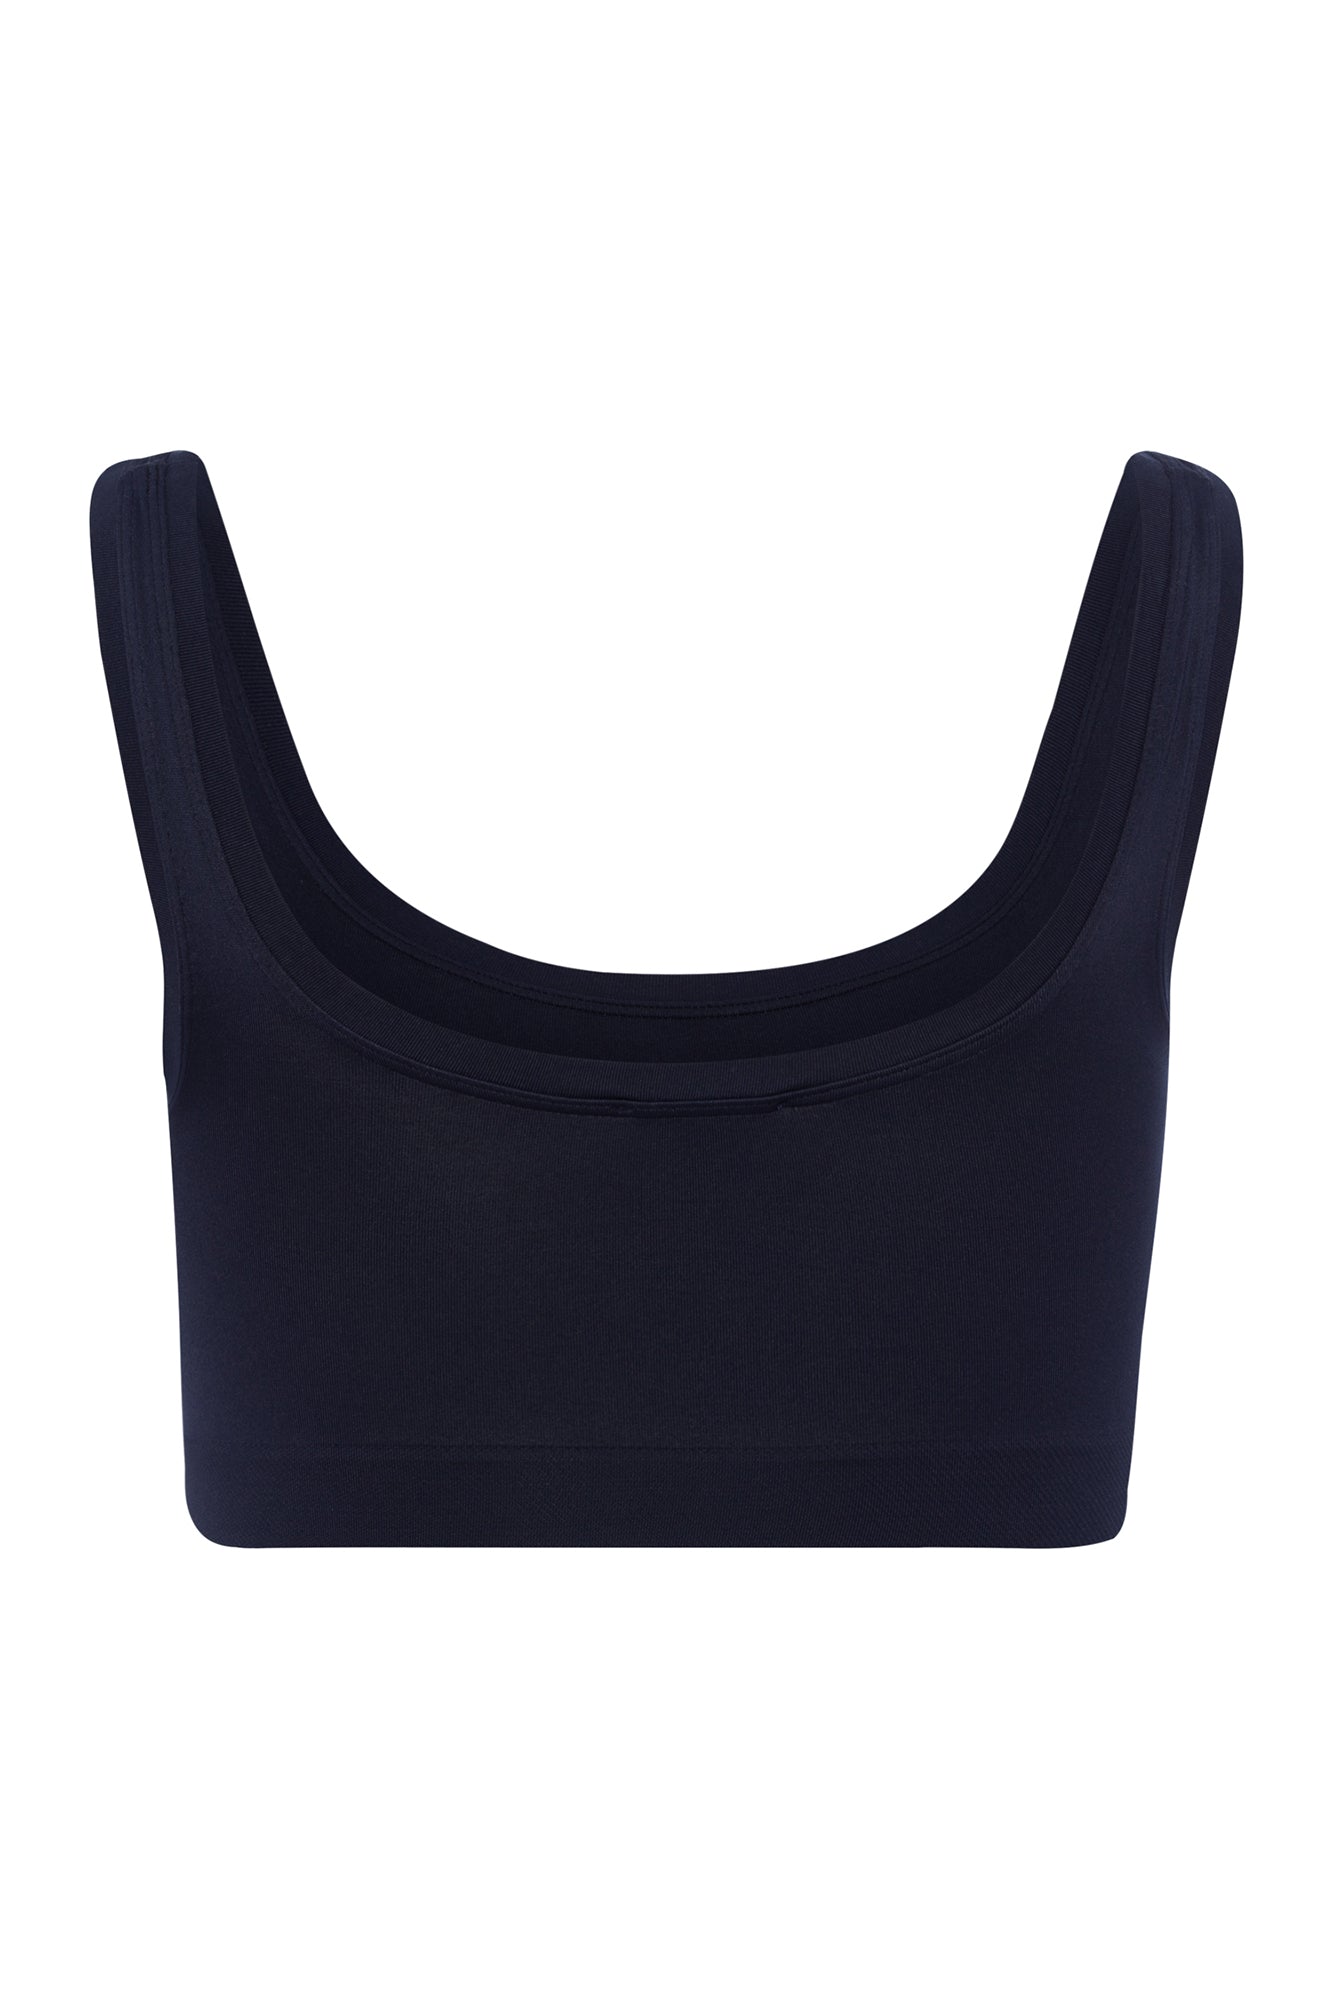 The Touch Feeling Crop Top By HANRO In Deep Navy